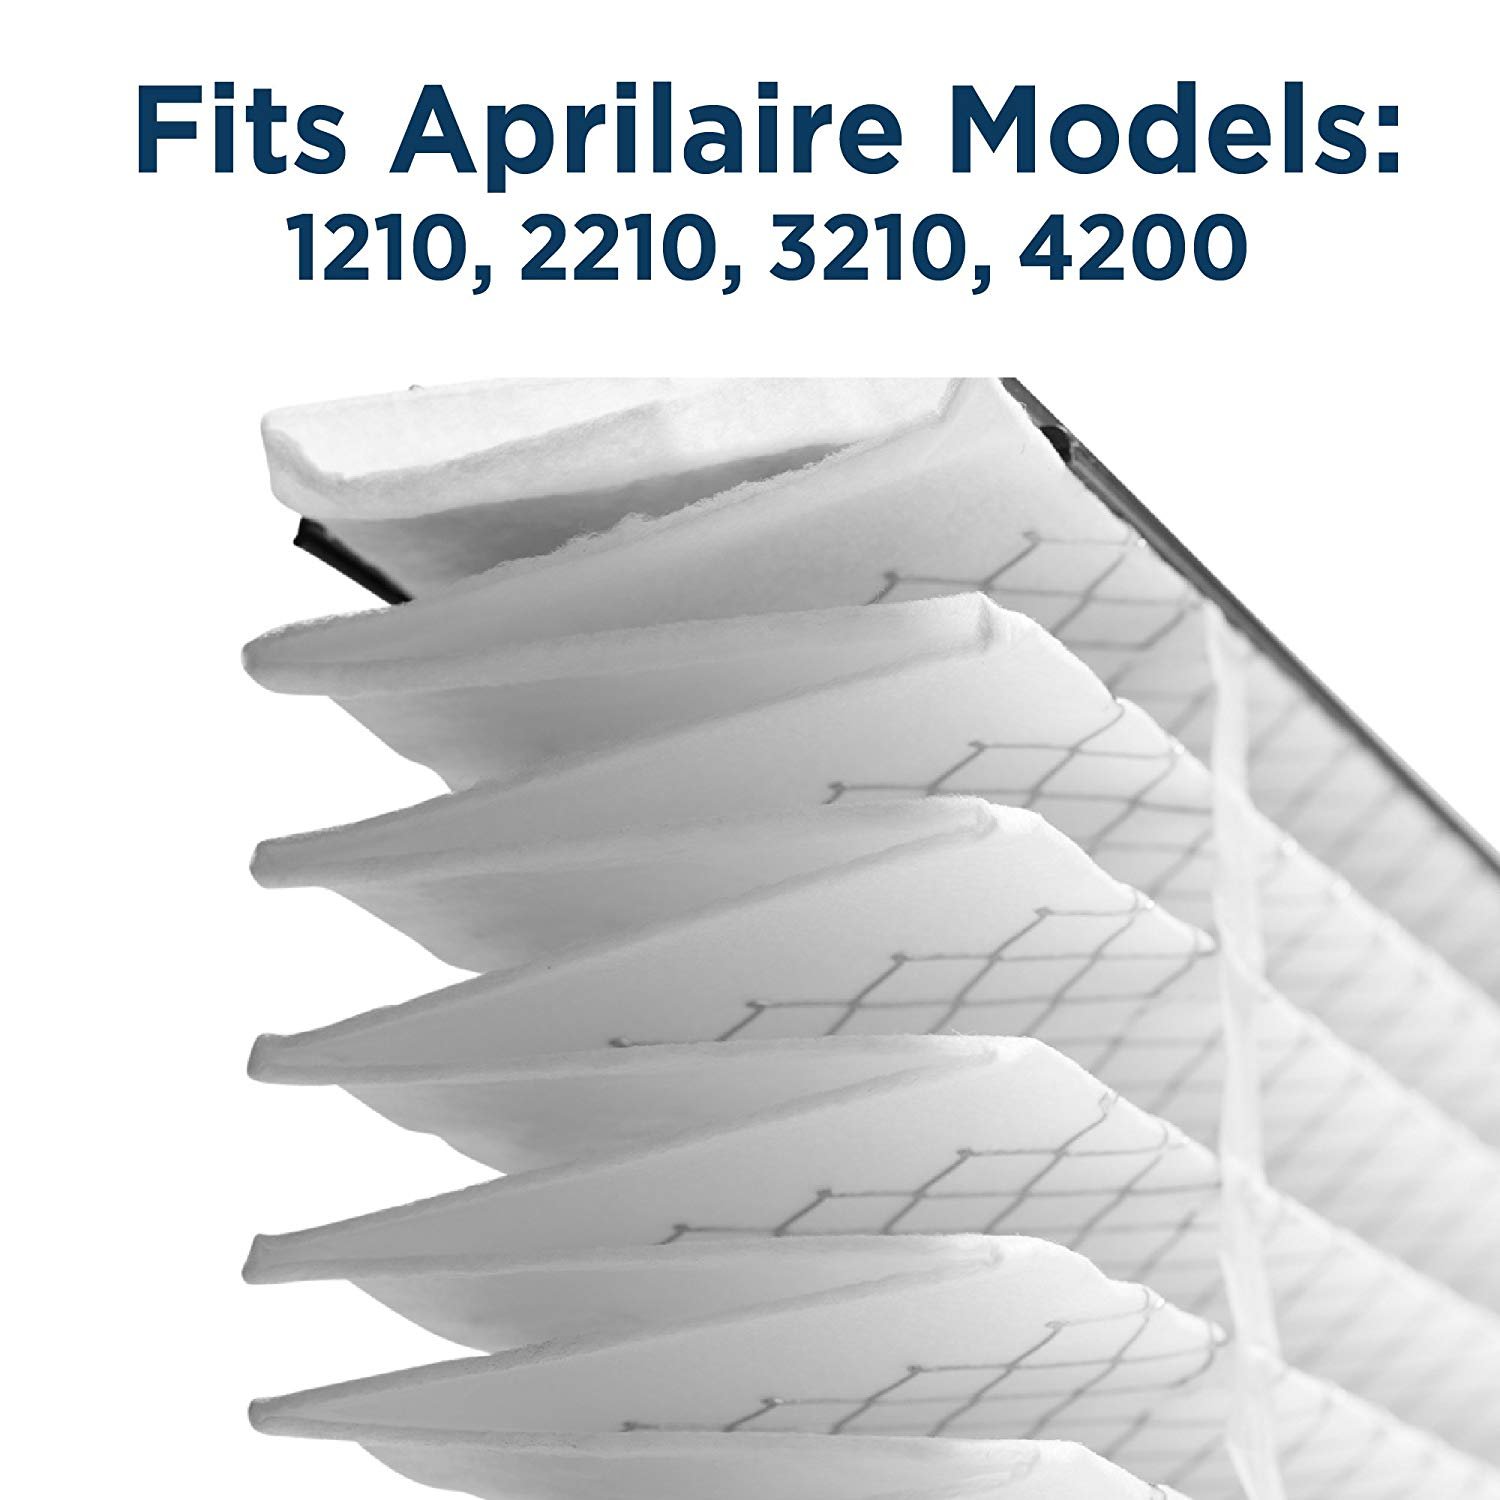 Aprilaire 210 Air Filter for Aprilaire Whole Home Air Purifiers, MERV 11 (Pack of 8) - image 4 of 9